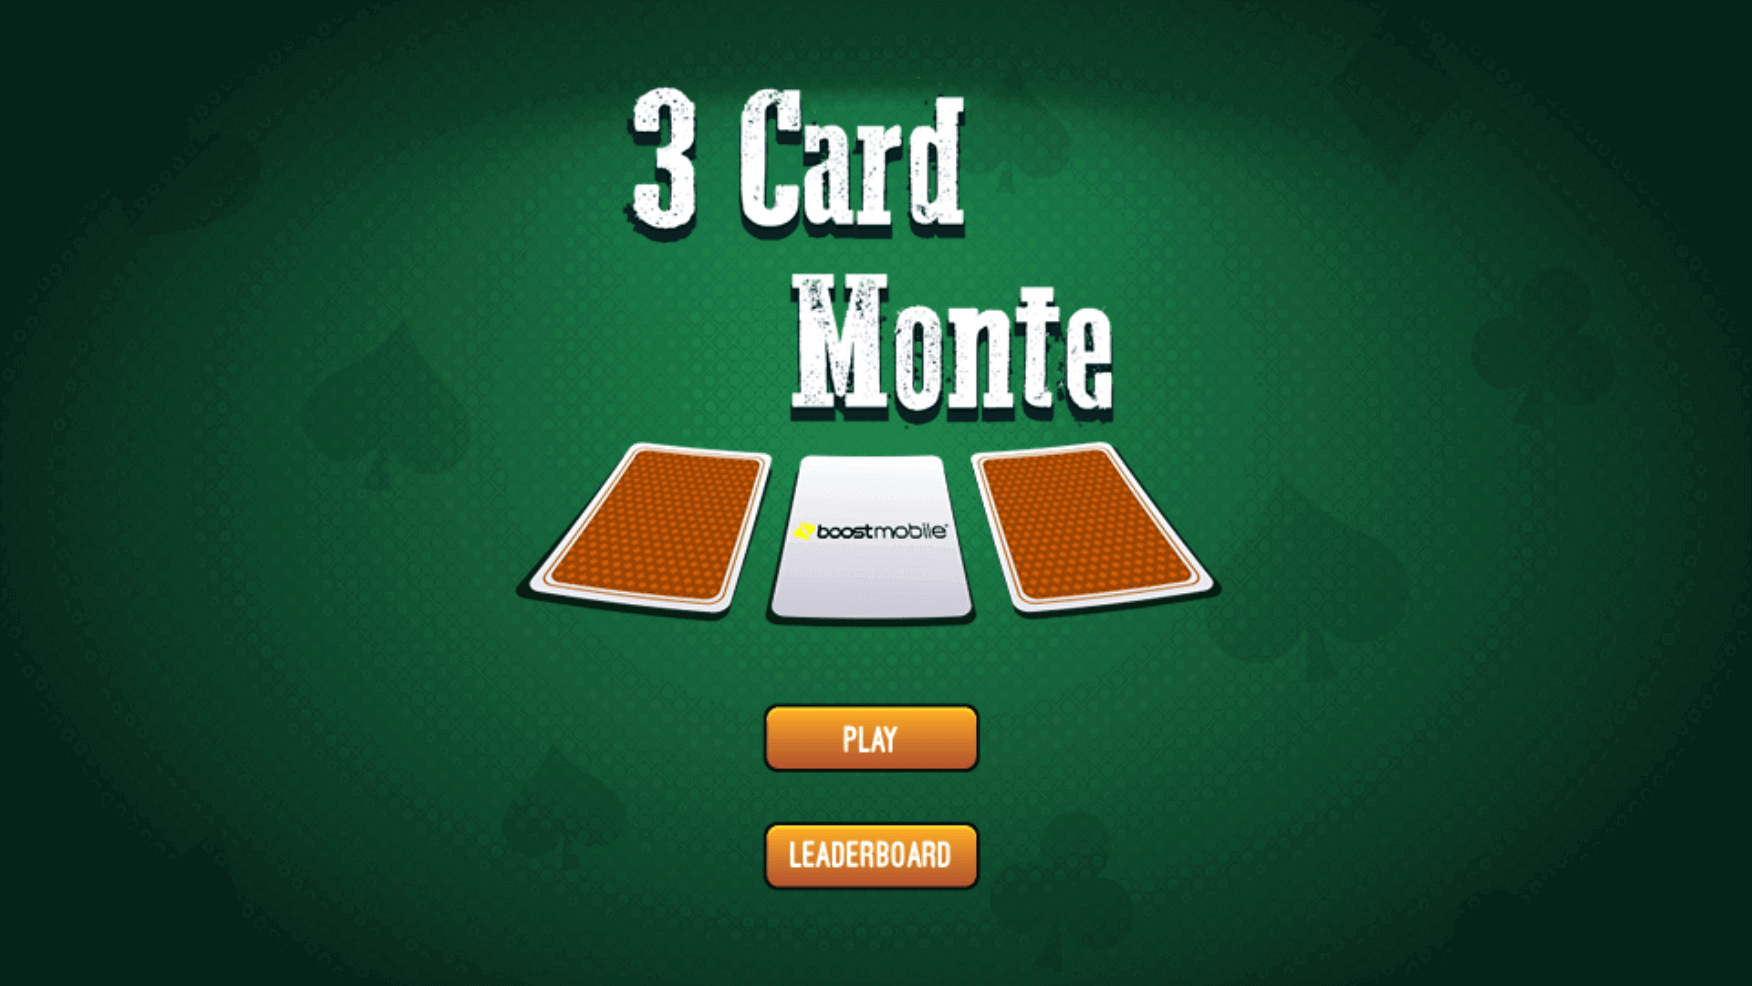 HTML5 Card Game For Boost Mobile